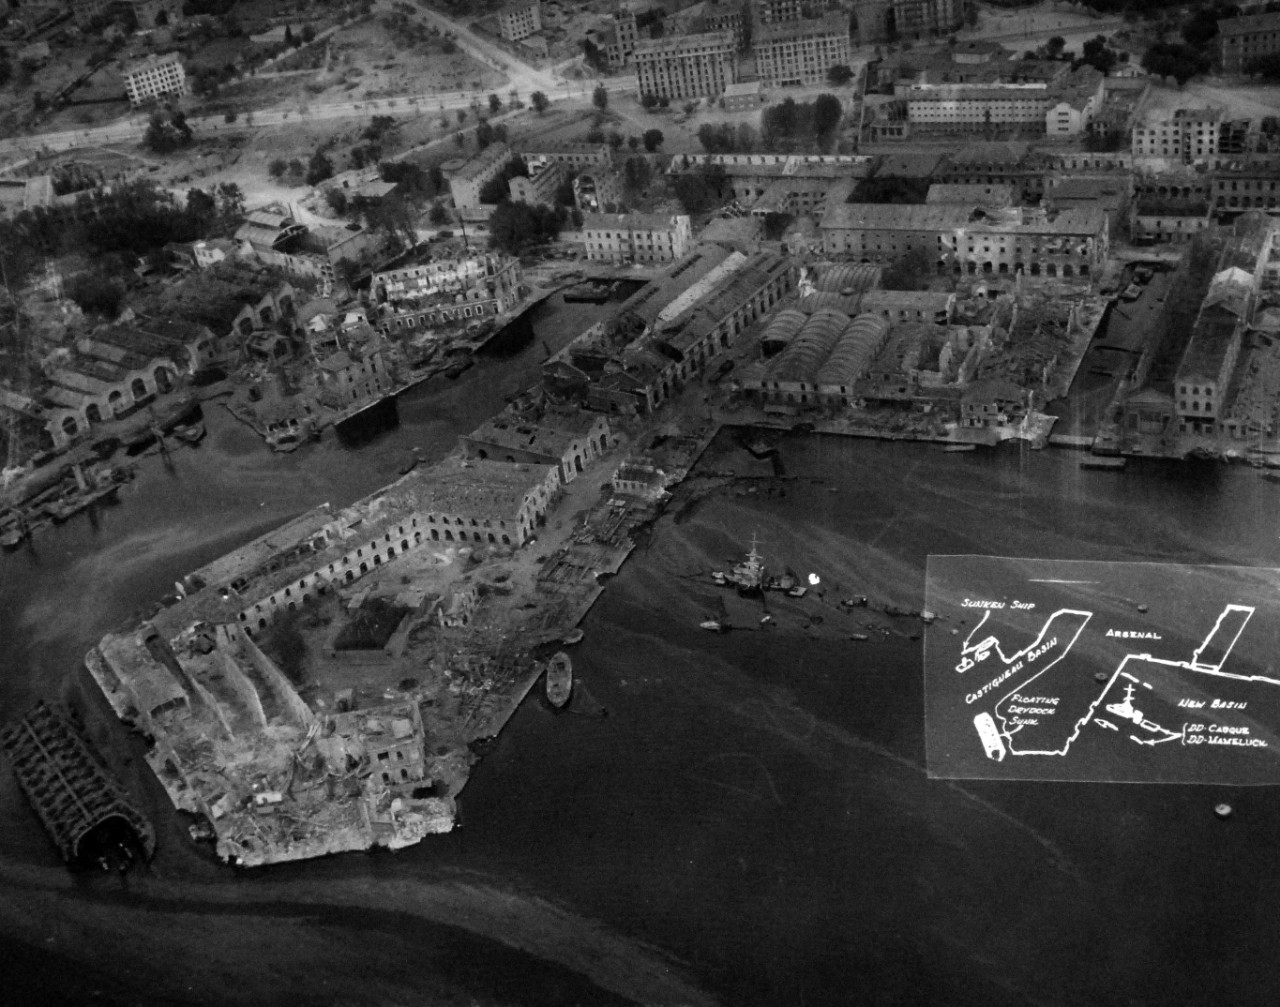 80-G-364017:  Invasion of Southern France, Toulon, August 1944.   Aerial view of the destruction to the harbor and installations at Toulon, France.  Taken by crew of USS Catoctin   (AGC 5).  Photograph received on 2 April 1946.   Official U.S. Navy Photograph, now in the collections of the National Archives.  (2014/7/10).